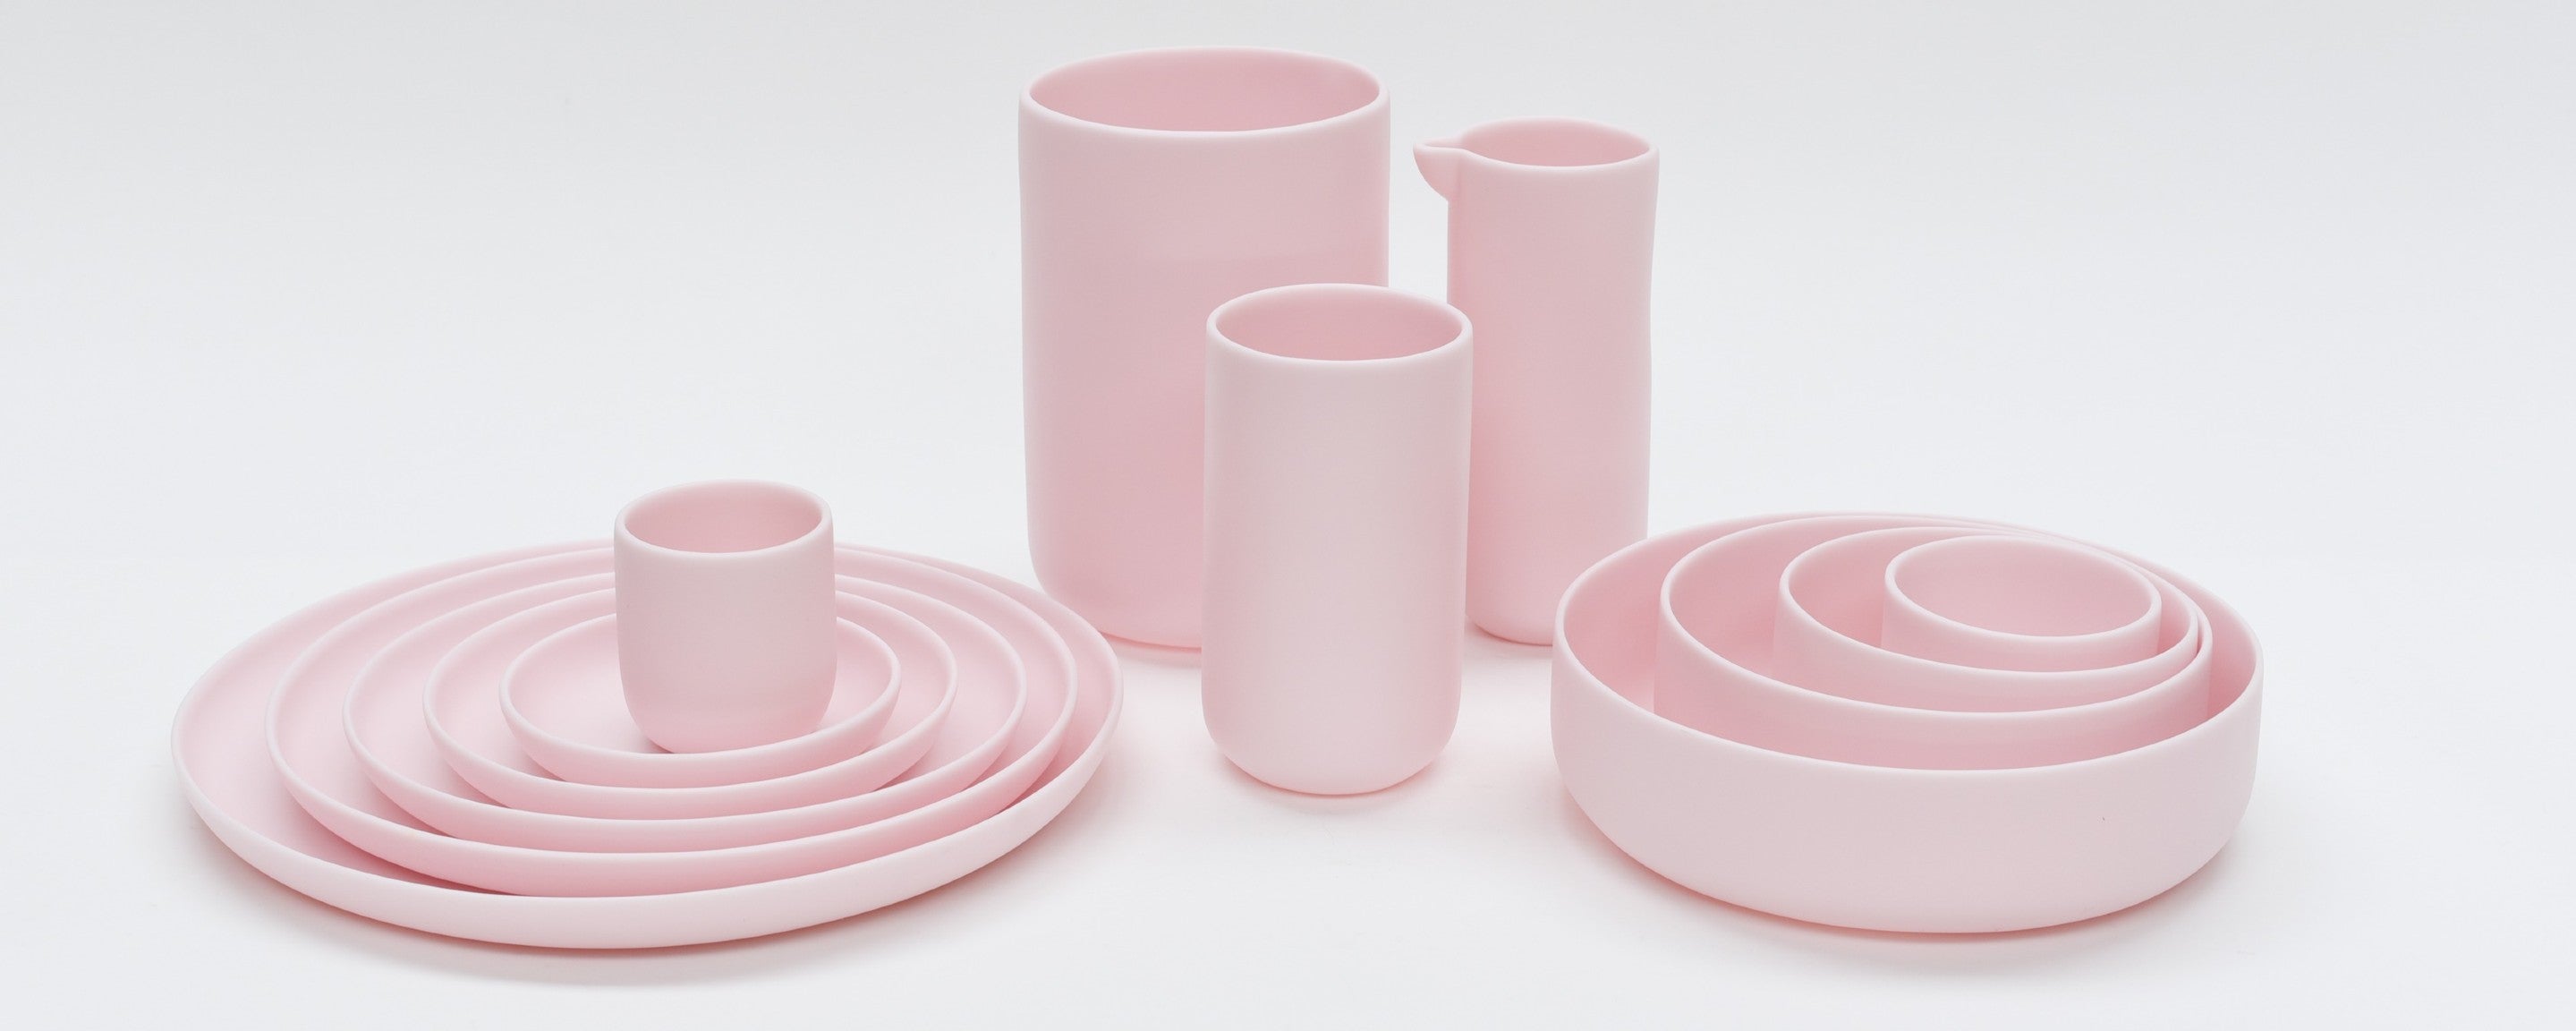 resin tabletop collection in pale rose by tina frey